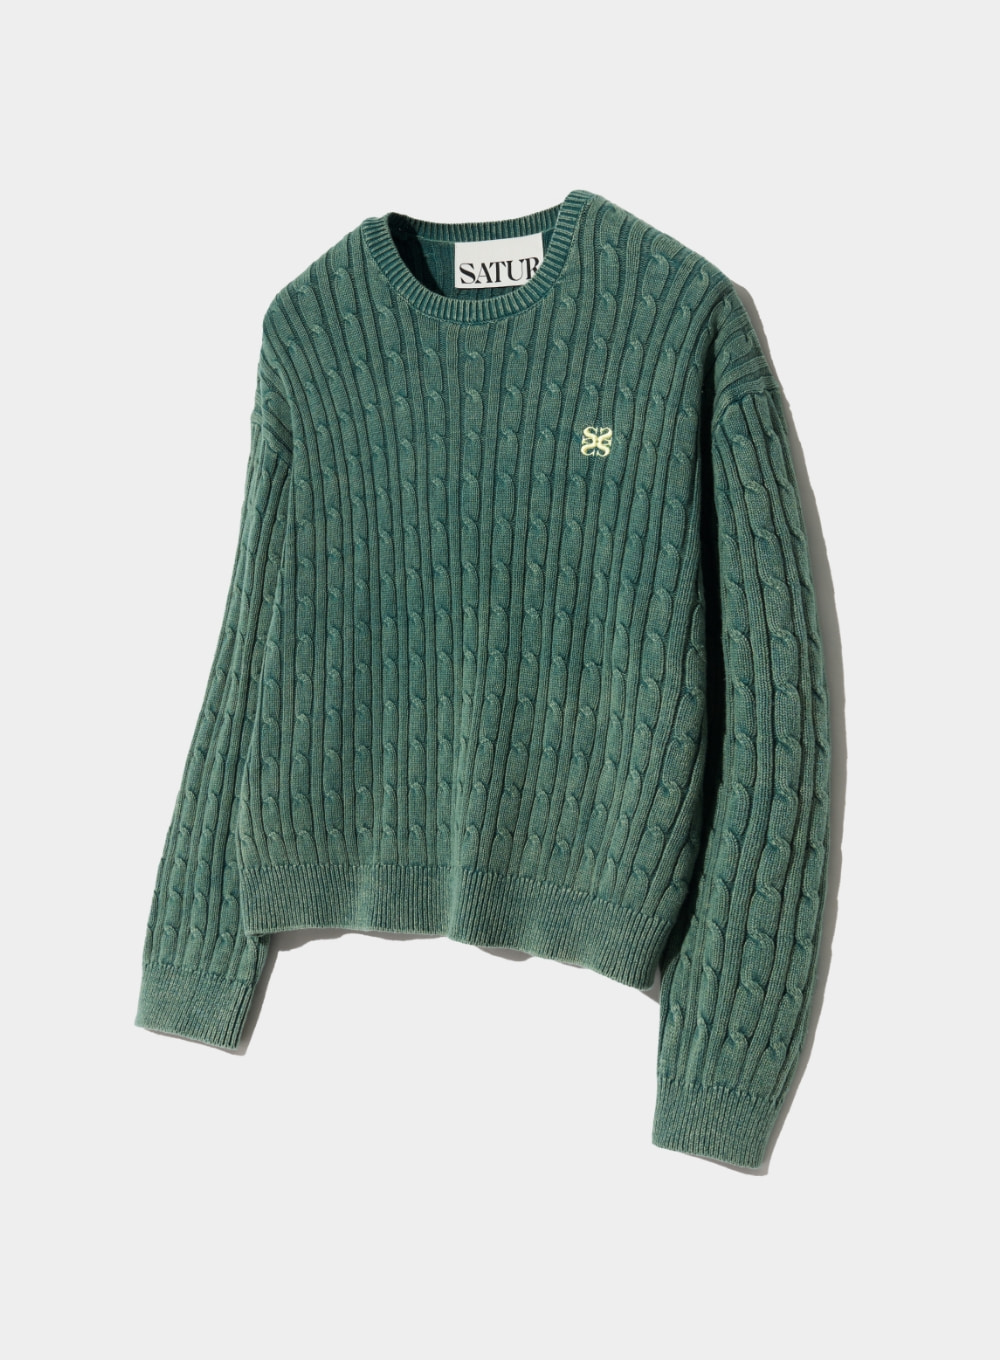 Classic Dyed Cable Knit - Vintage Green